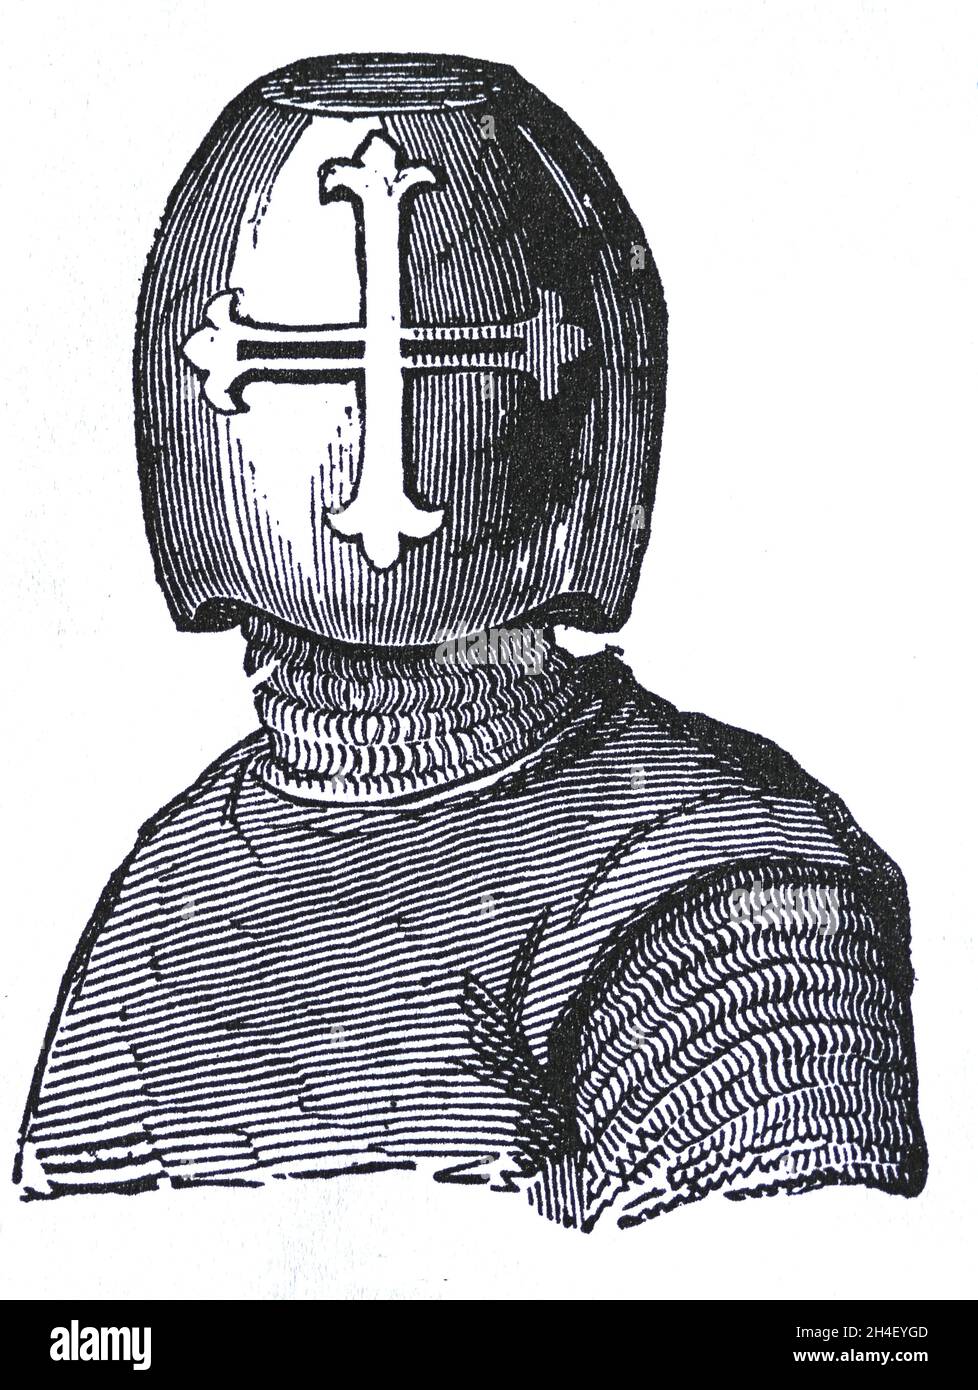 Middle Ages. 13th century. Helmet. Engraving, 19th century. Stock Photo